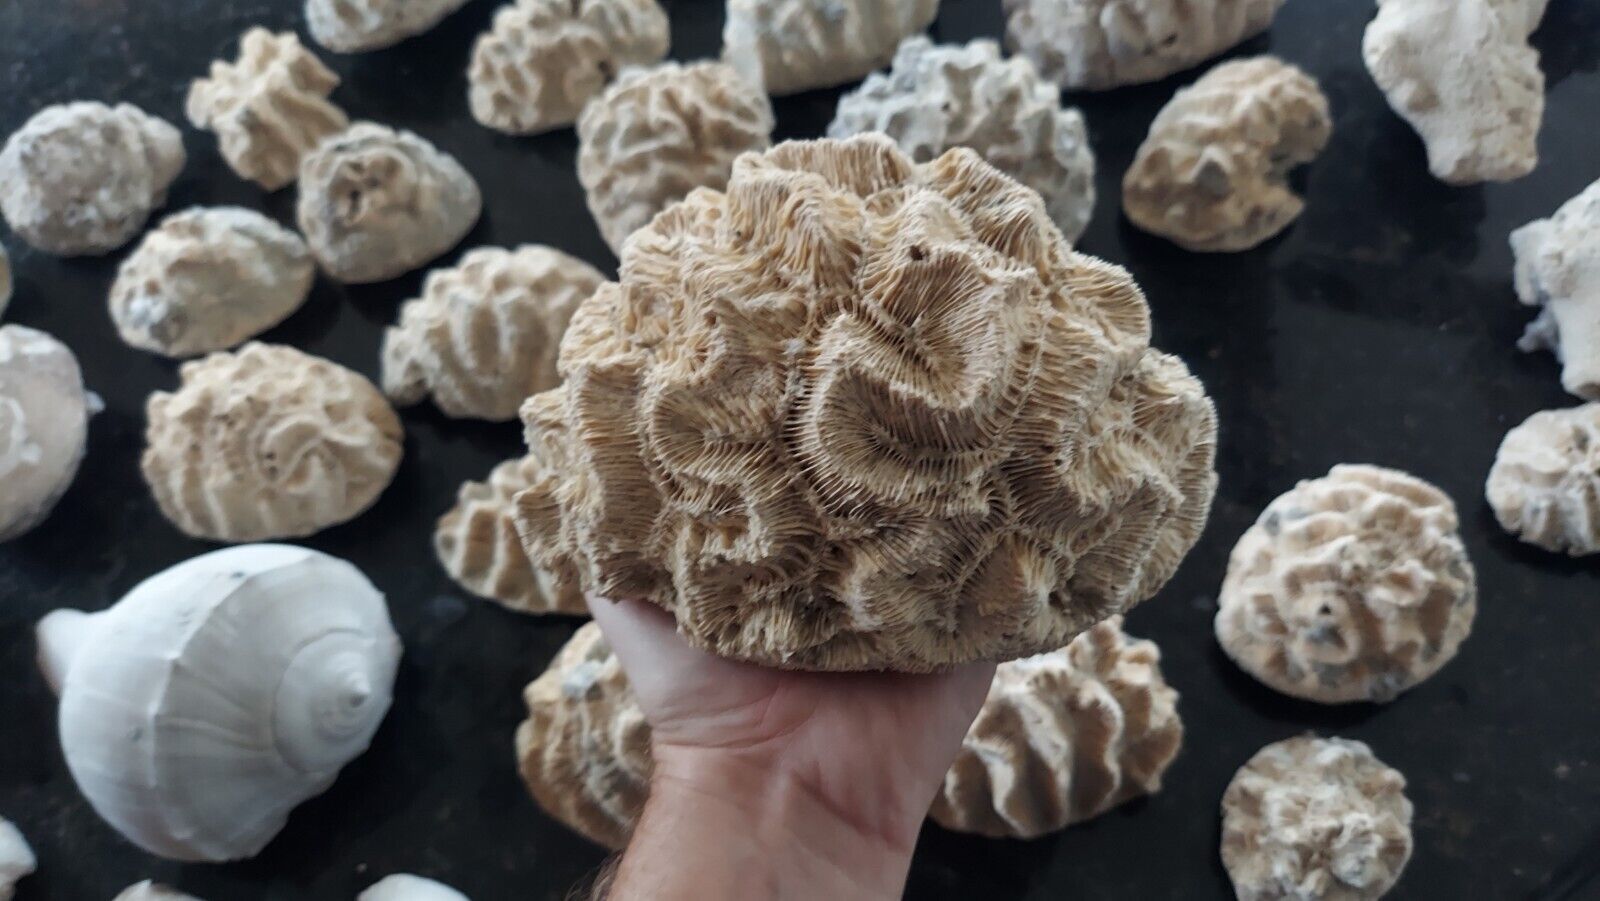 Prehistoric Brain Coral Fossil Collection (40 pieces) Extremely Rare